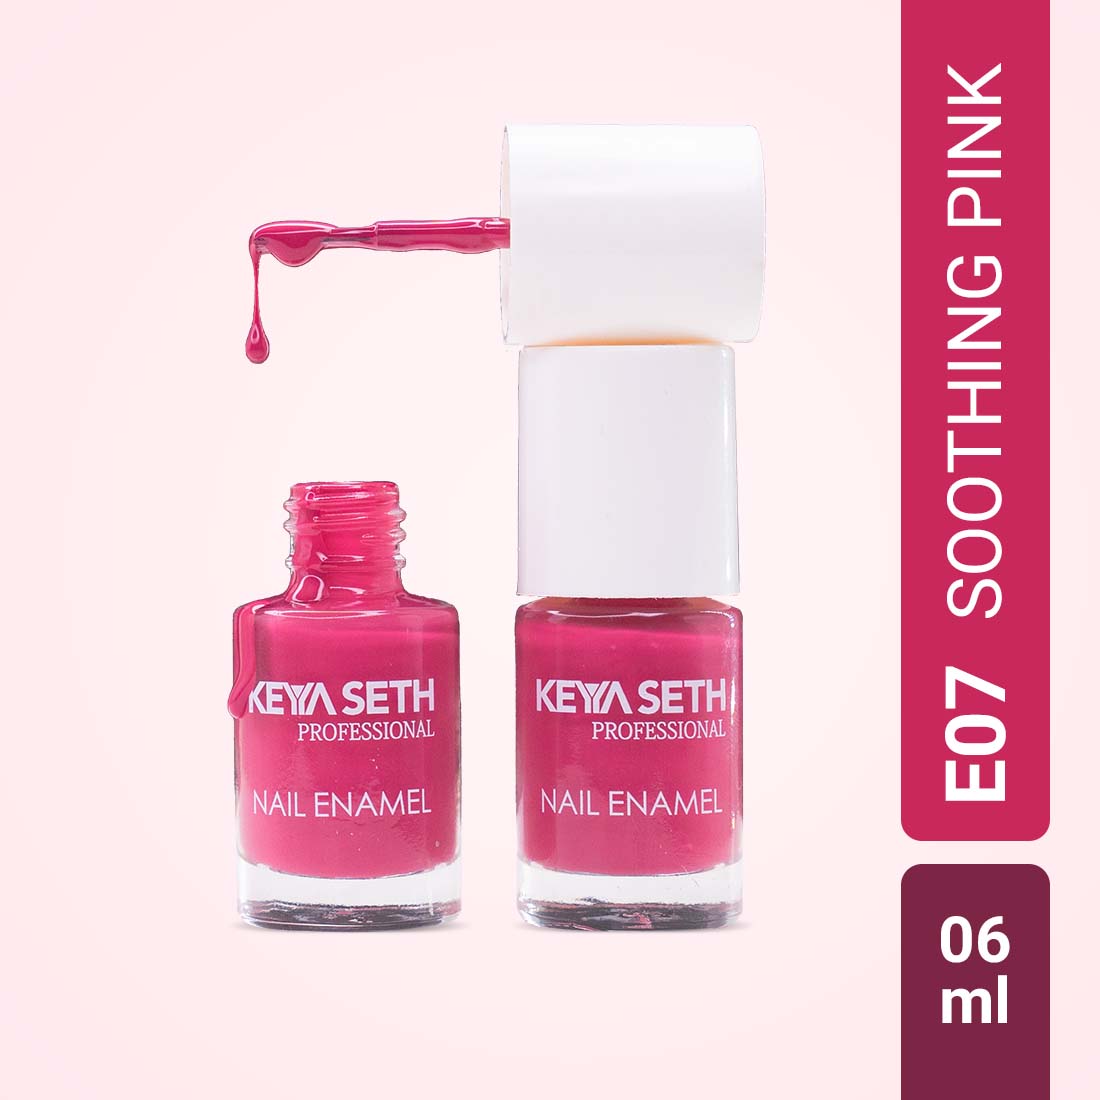 Buy Lakme Nail Polish Online At Best Prices And Deals